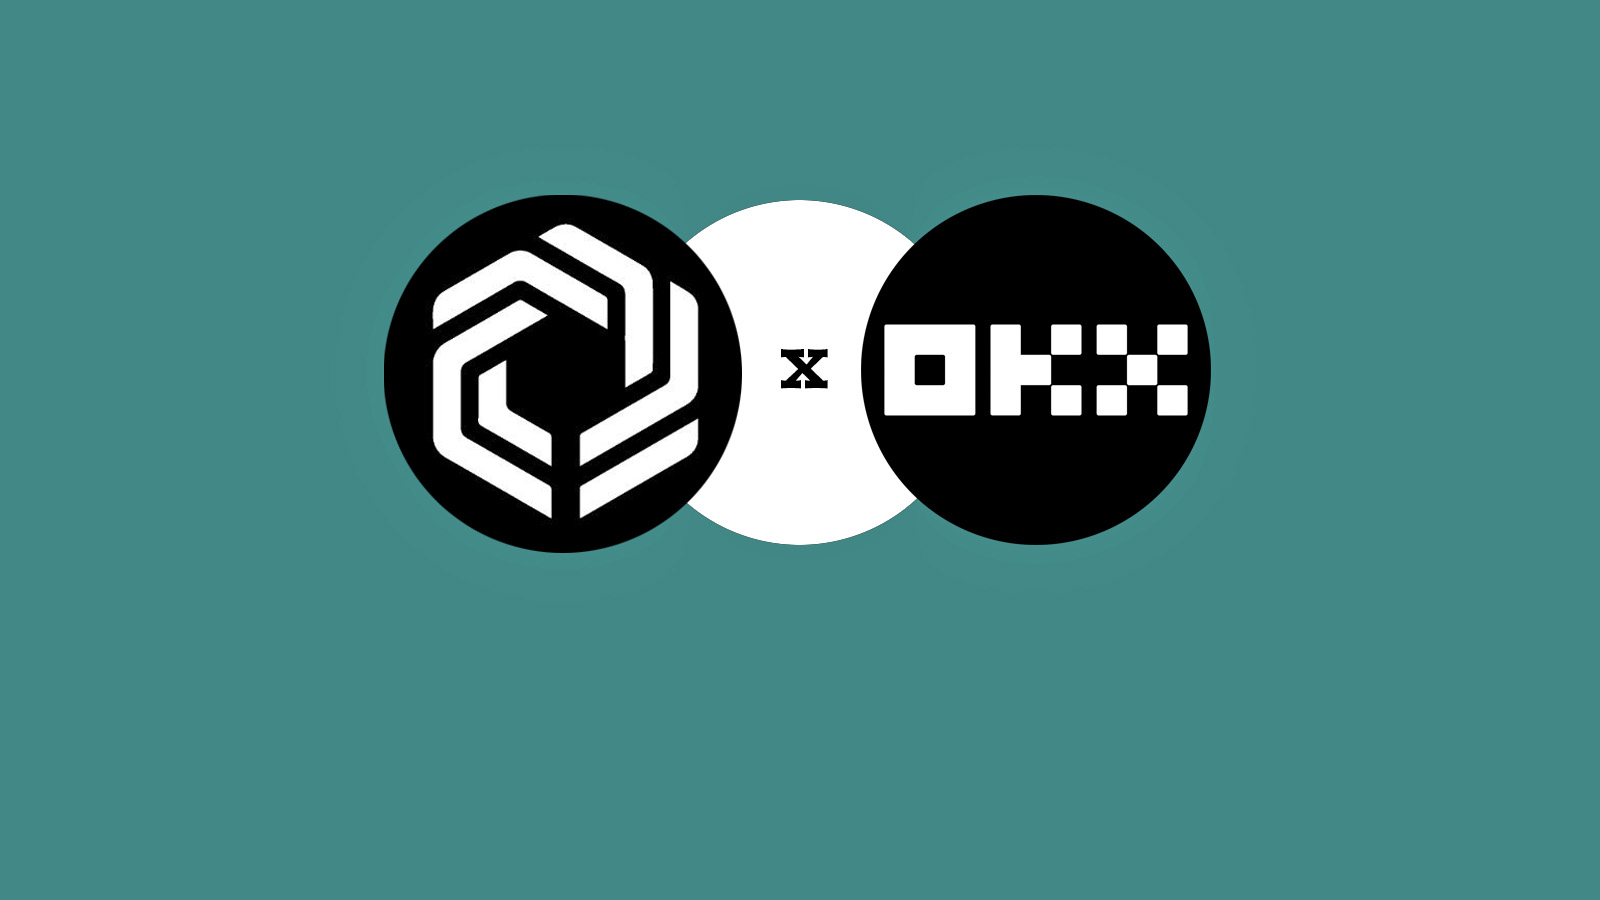 Immutable and OKX integrate to launch web3 gaming launchpad